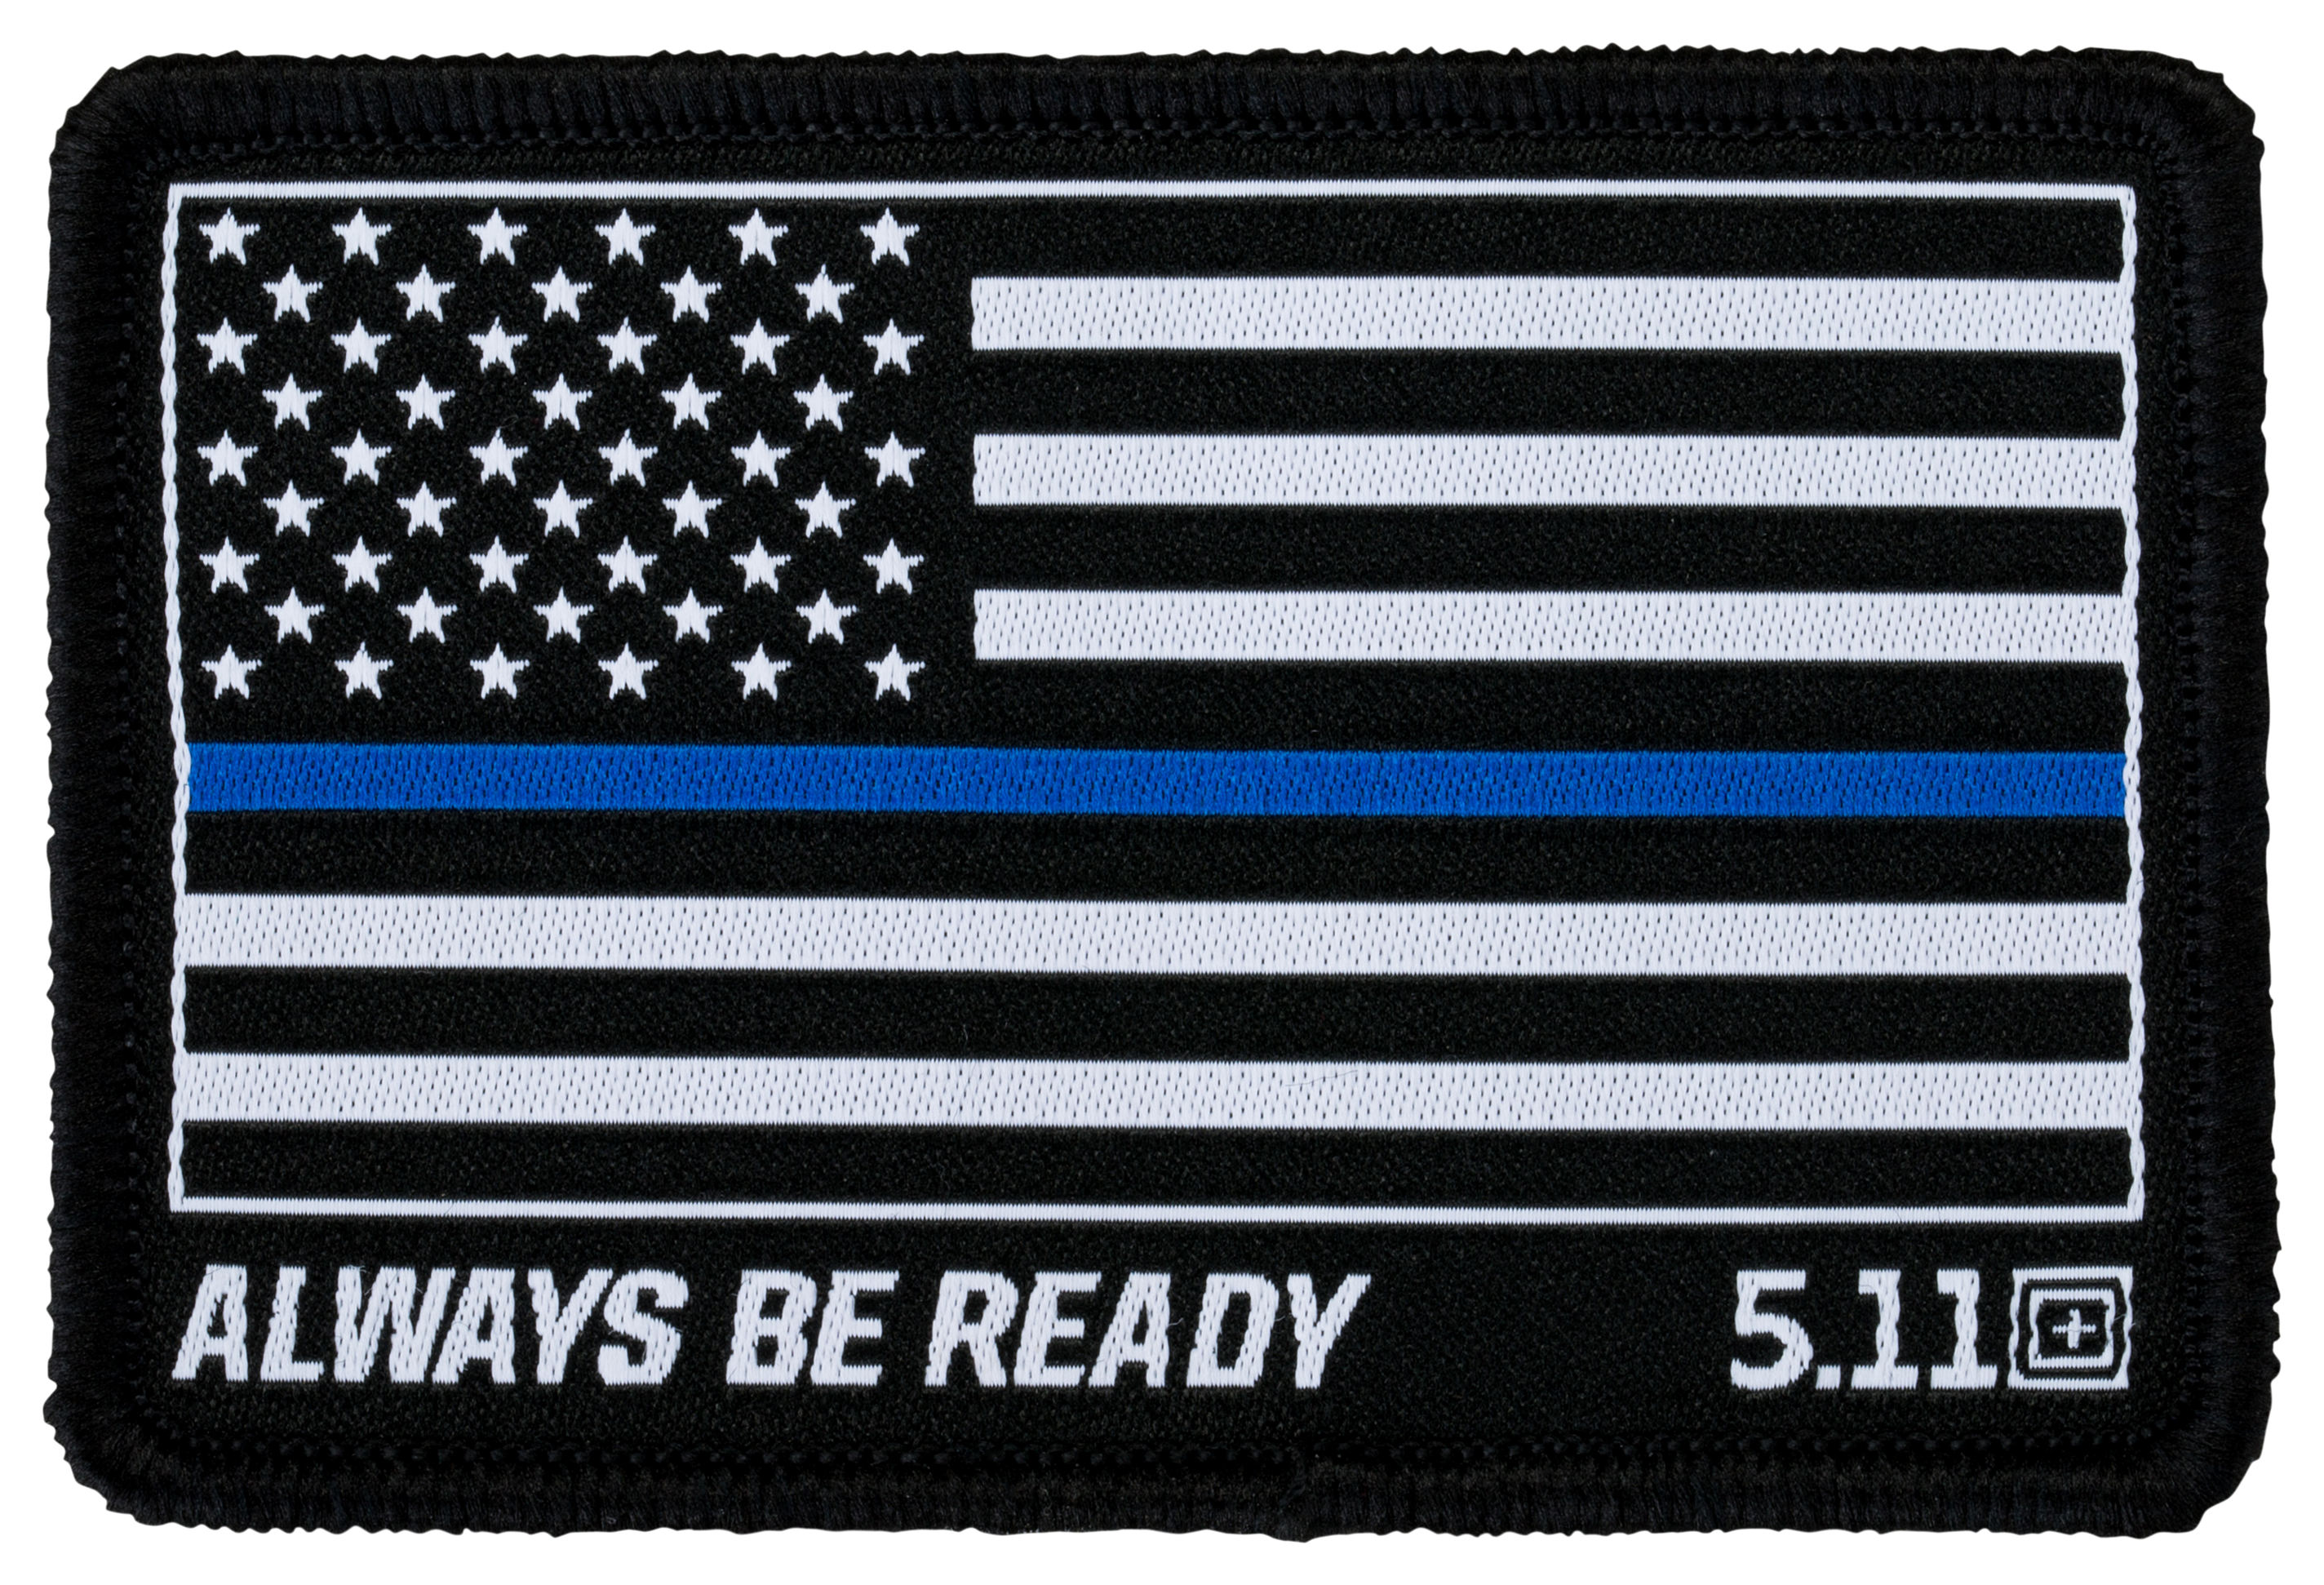 5.11 Tactical Patches, New Designs